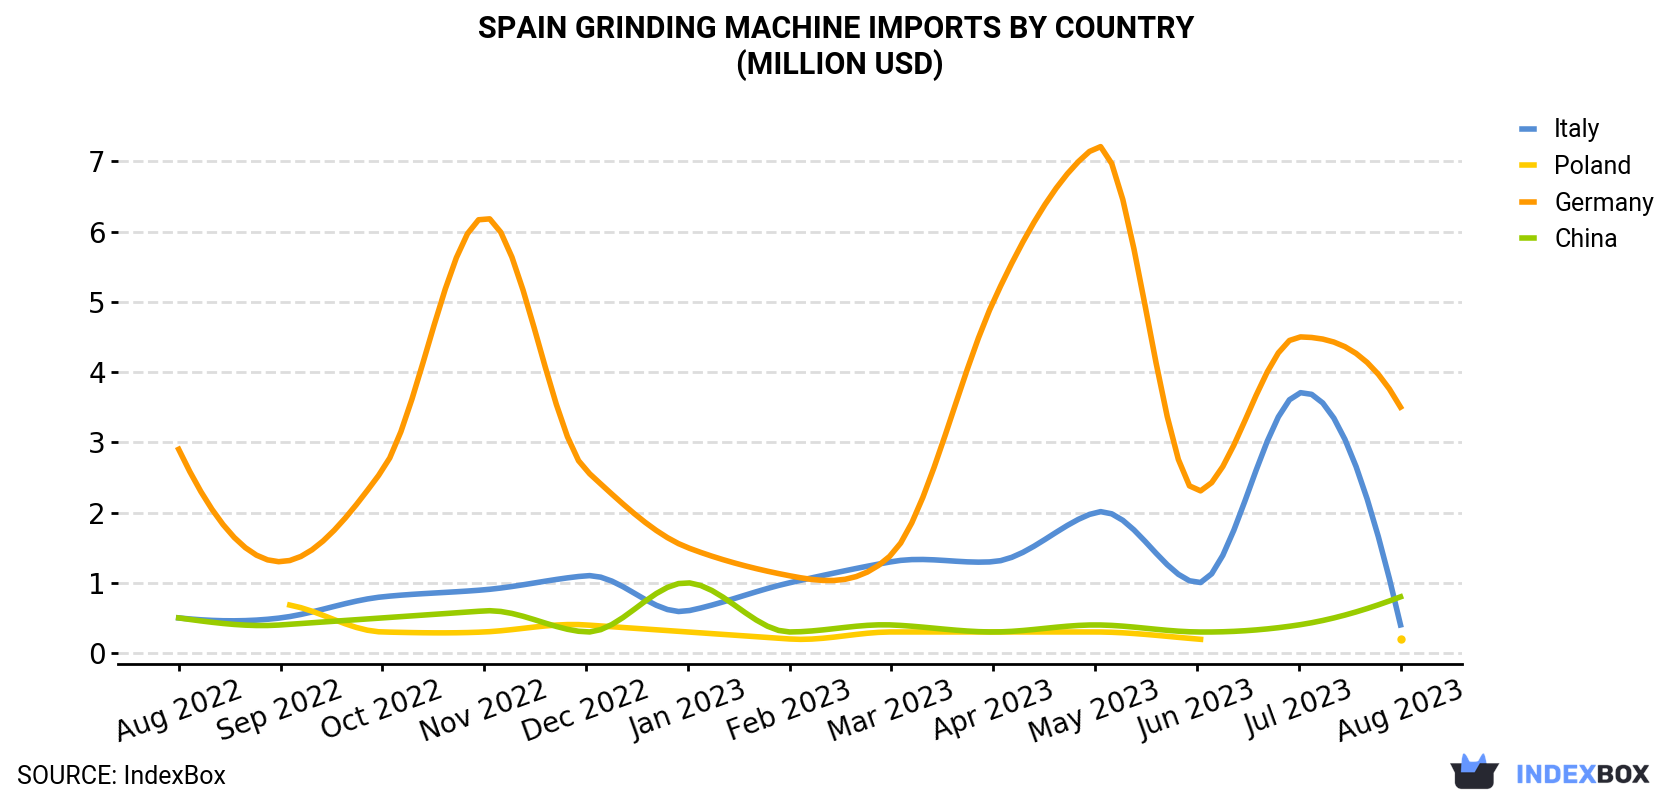 Spain Grinding Machine Imports By Country (Million USD)